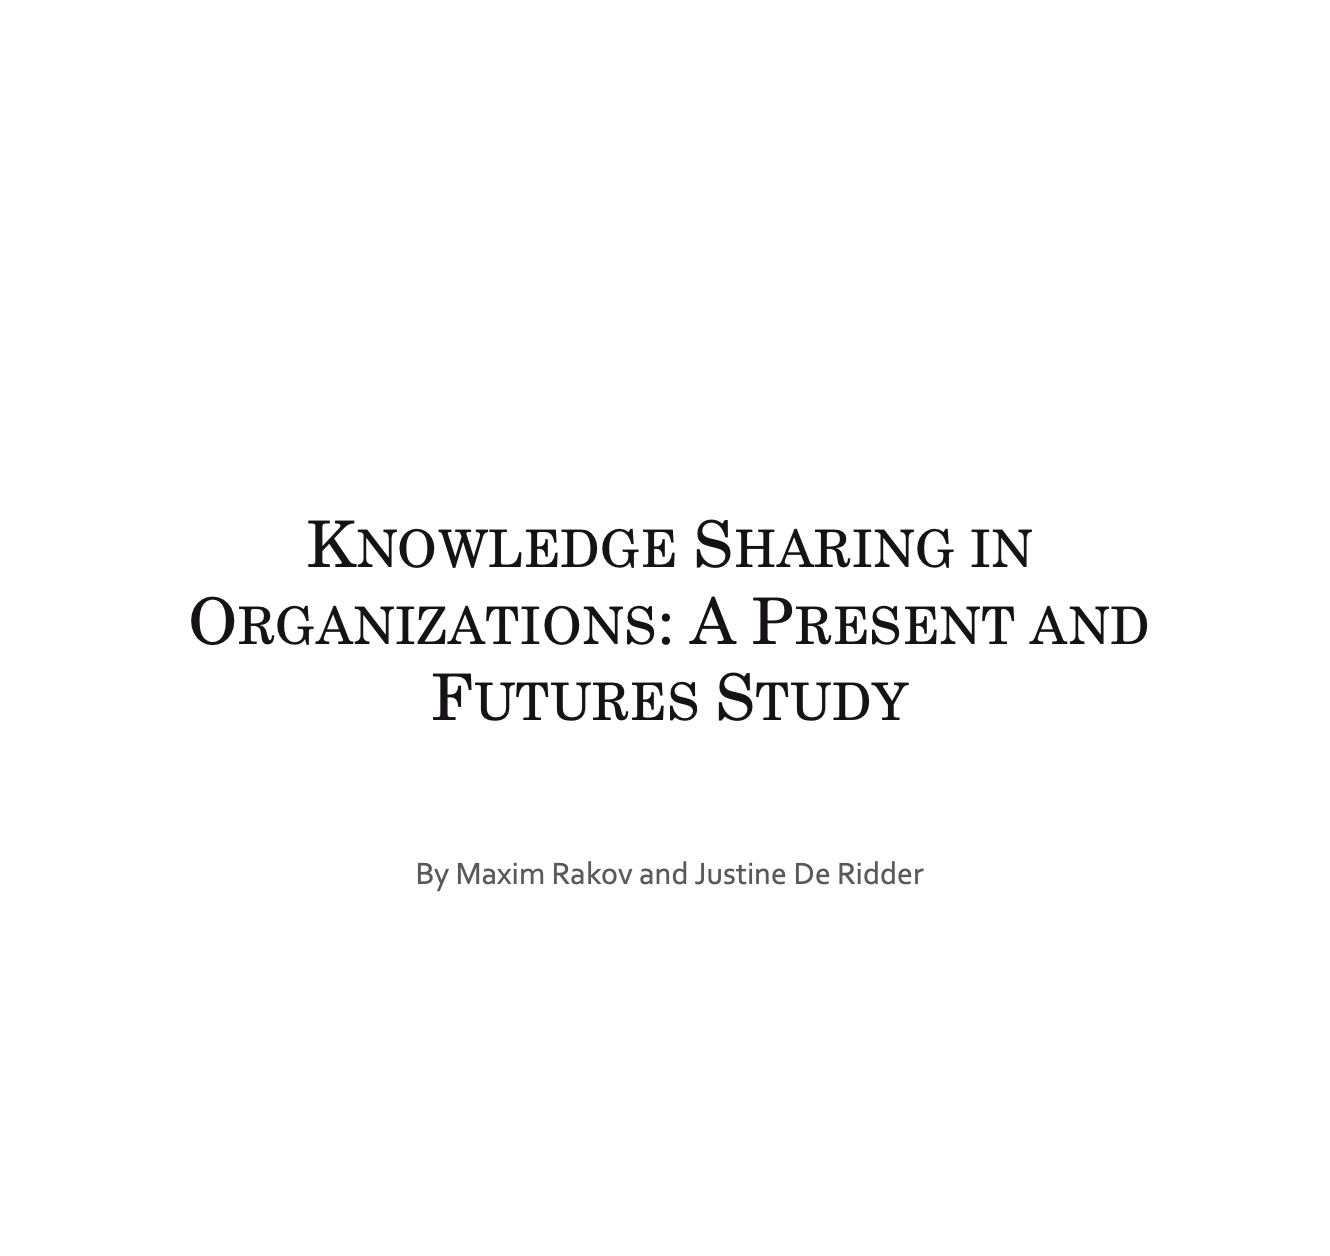 Knowledge Sharing in Organizations: A Present and Futures Study